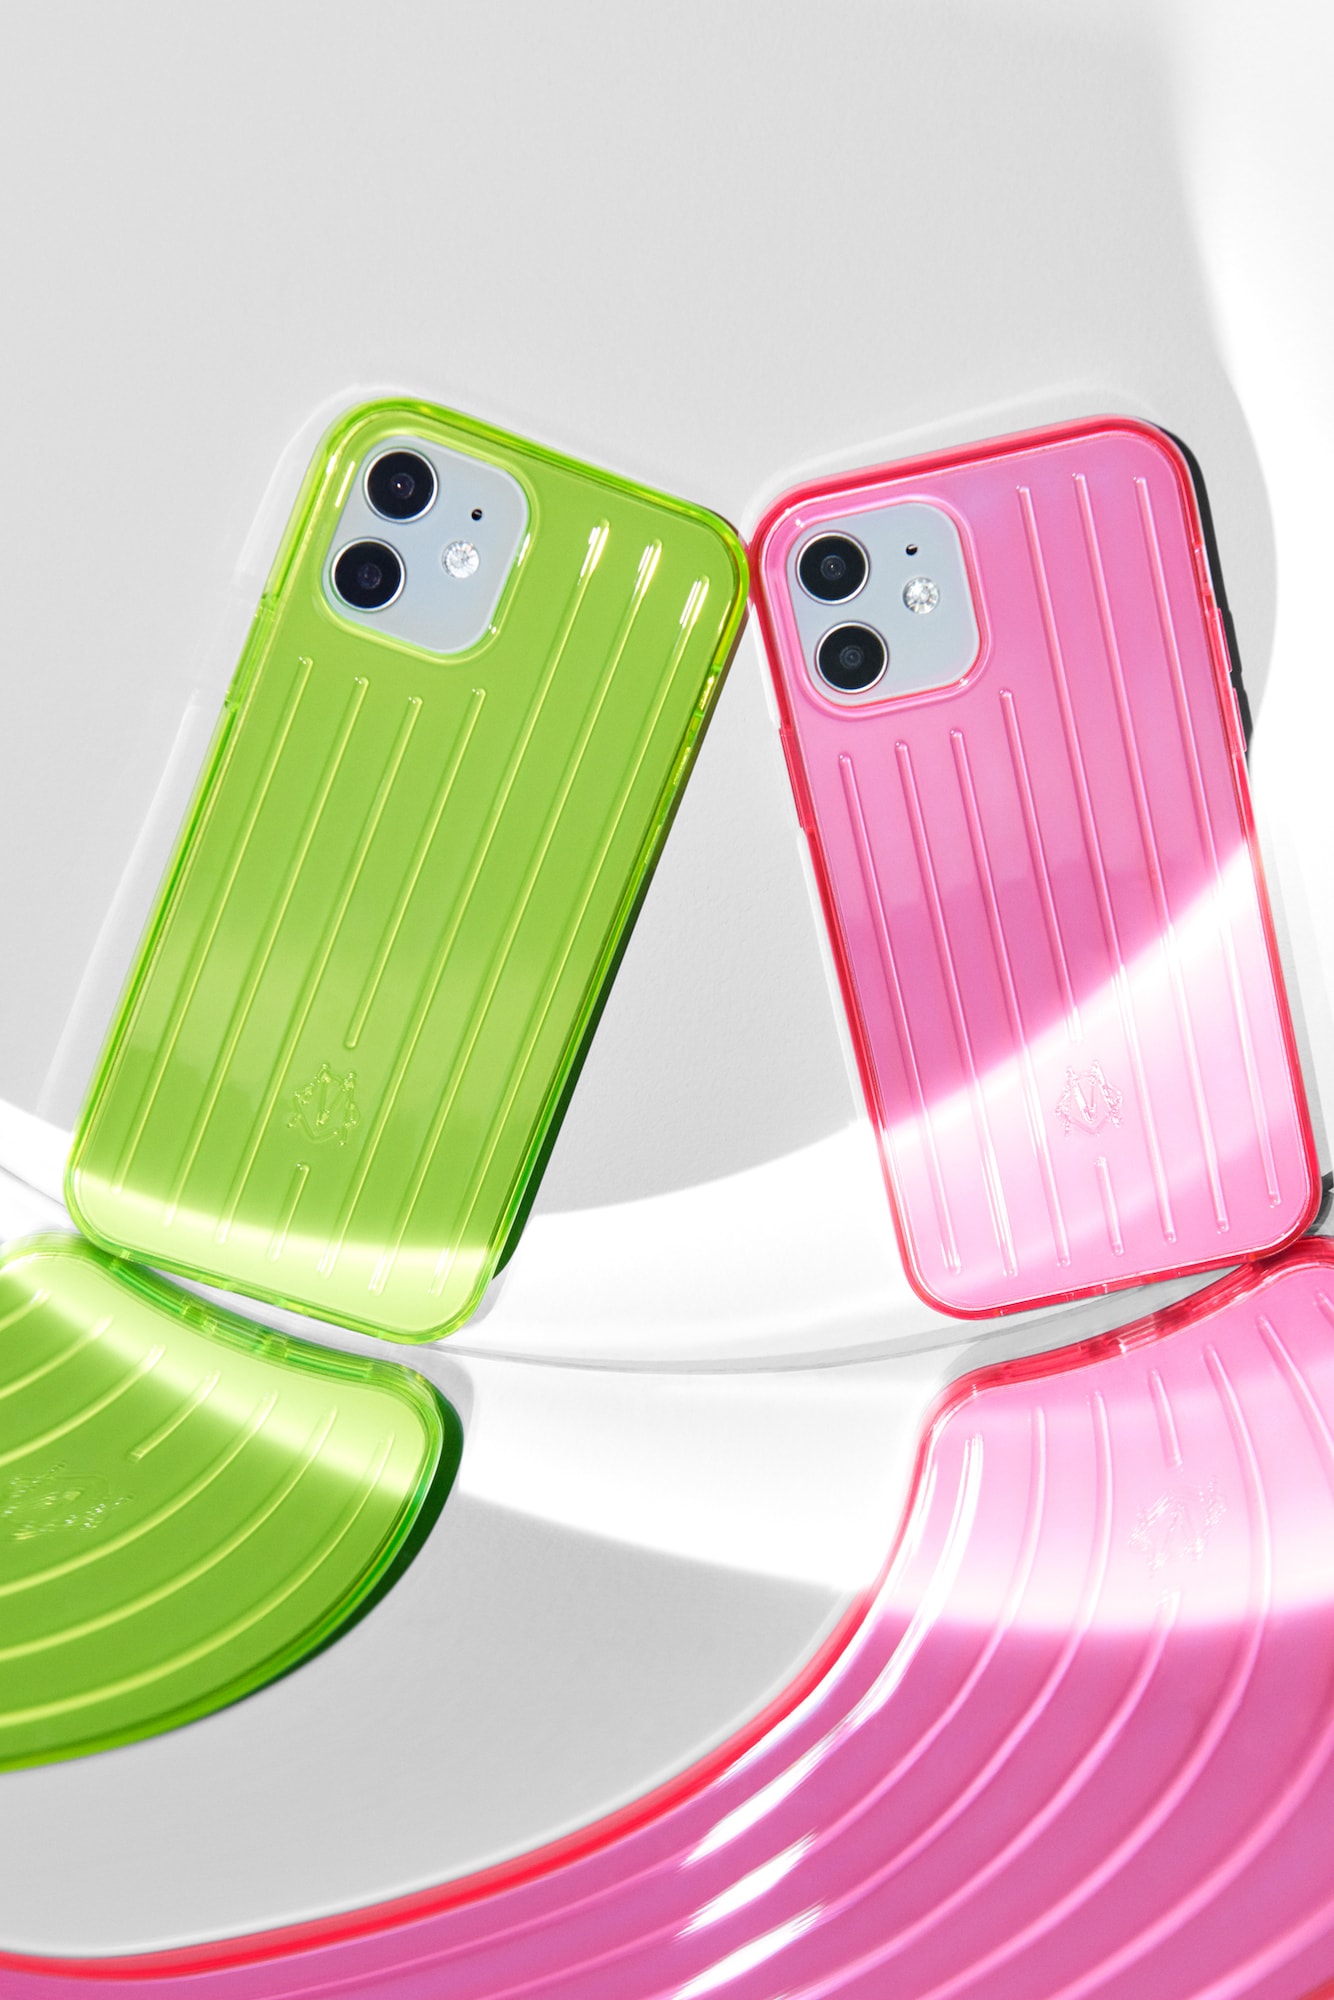 RIMOWA Releases New Neon Suitcase Range Pink Lime Transparent Travel Bags